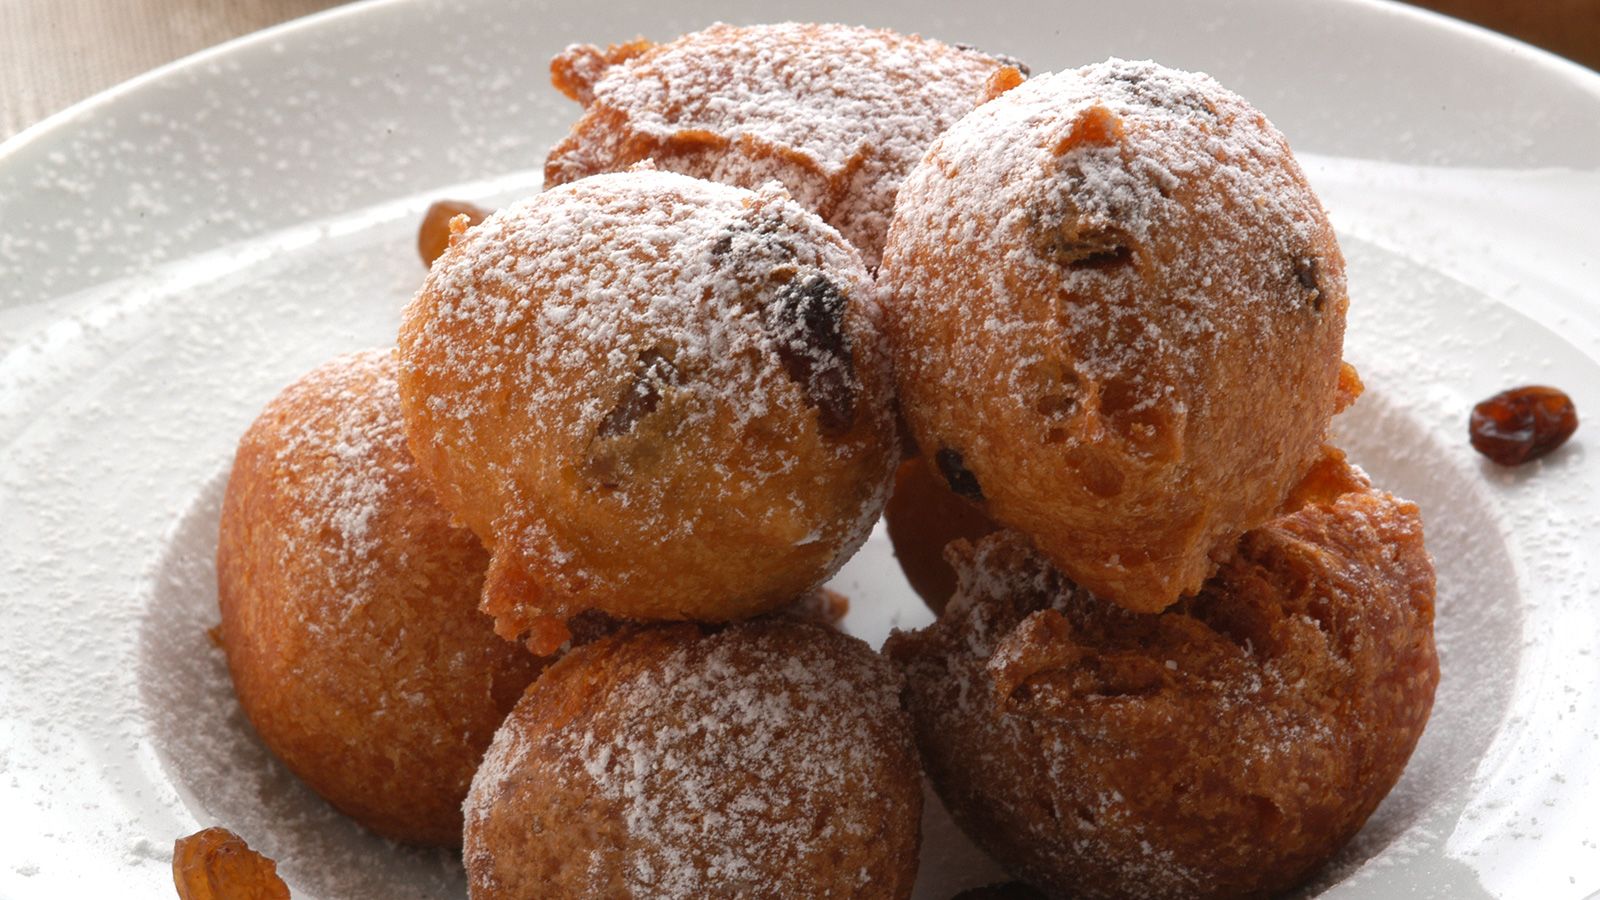 <strong>Festive and fried: </strong>A frittella veneziana, otherwise known as a fritola, is a fried ball of dough stuffed with pine nuts and raisins and dusted with sugar, made during the Carnevale period.